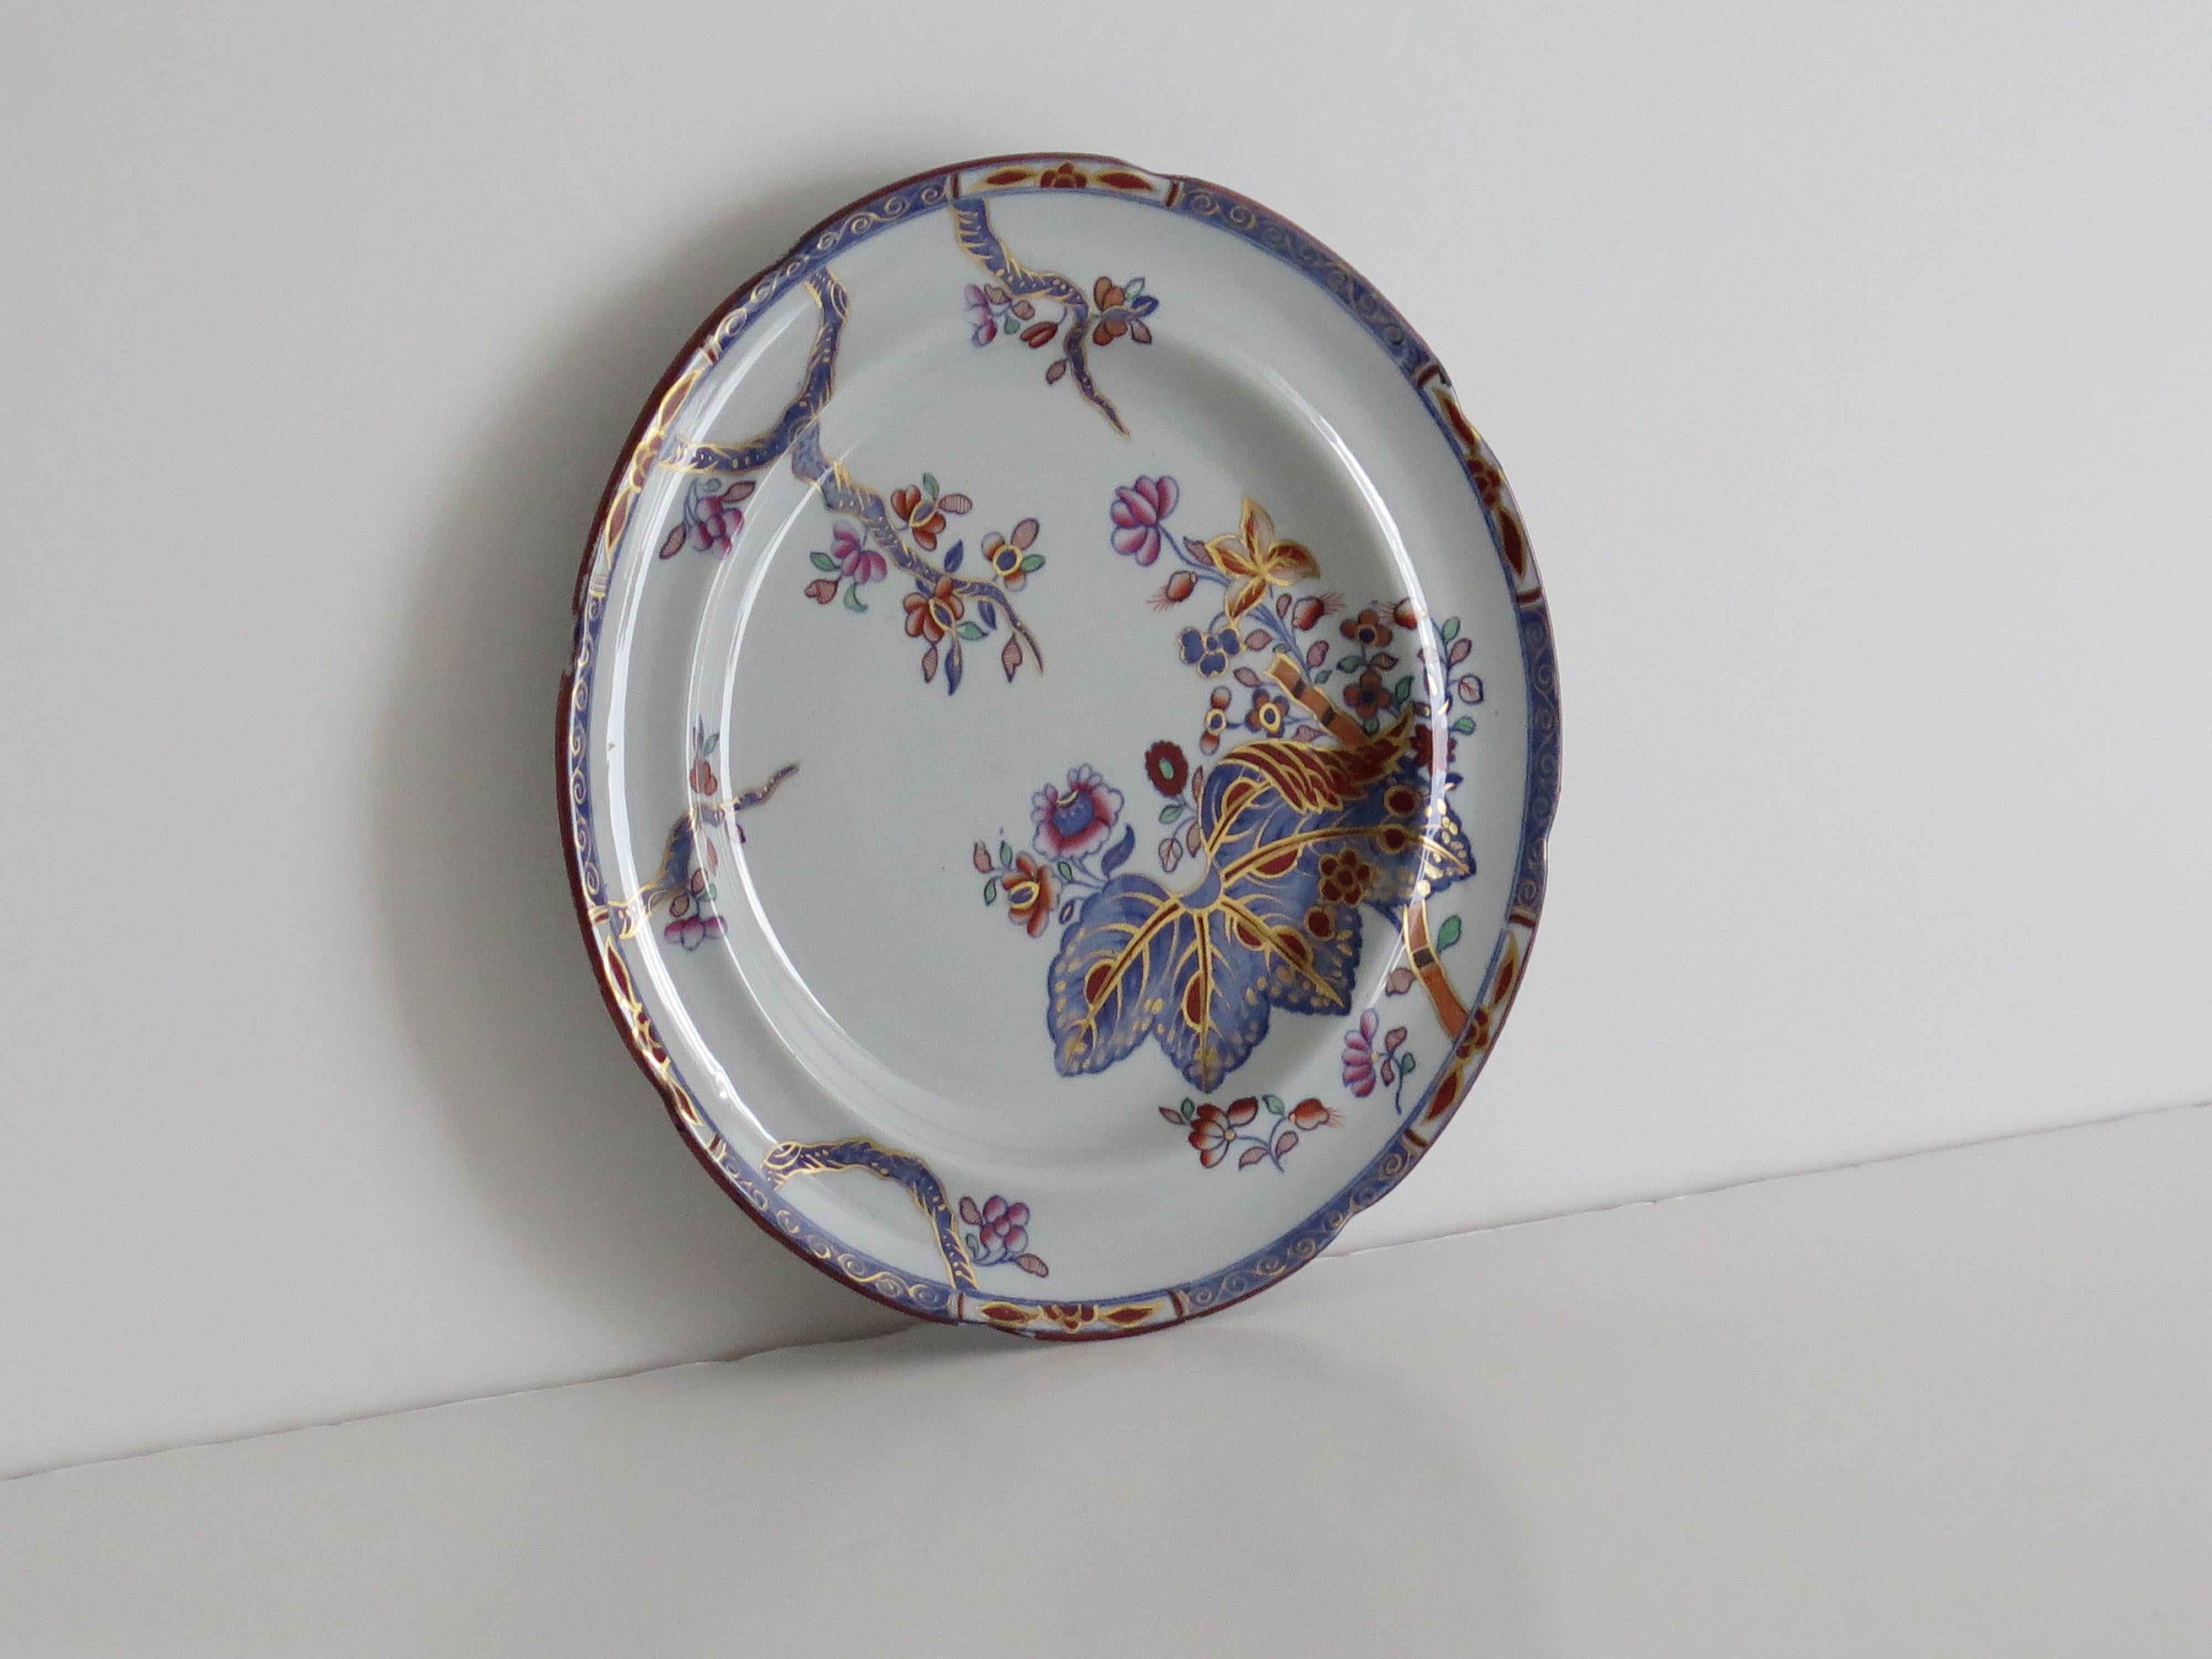 This is a good stone China (Ironstone) large Dinner Plate, hand painted in the tobacco leaf pattern, number 2061, made by the Copeland (Spode) factory in the 19th century, English Victorian period, circa 1880.

The Plate is made from Ironstone China